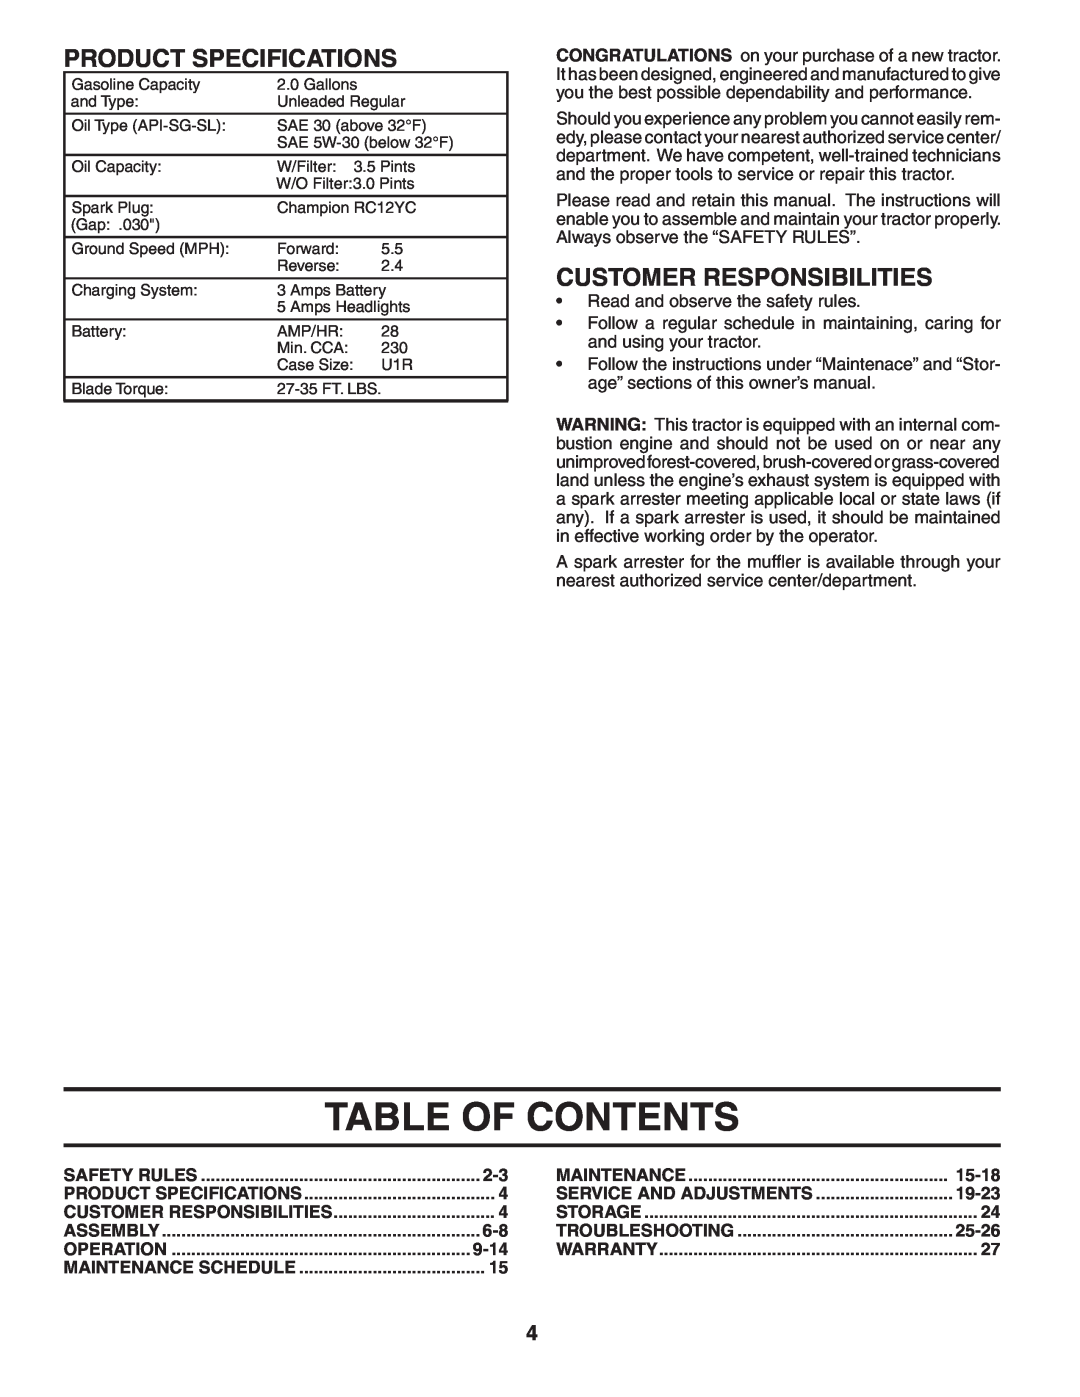 Poulan 96012004701, 402559 Table Of Contents, Product Specifications, Customer Responsibilities, 9-14, 15-18, 19-23, 25-26 